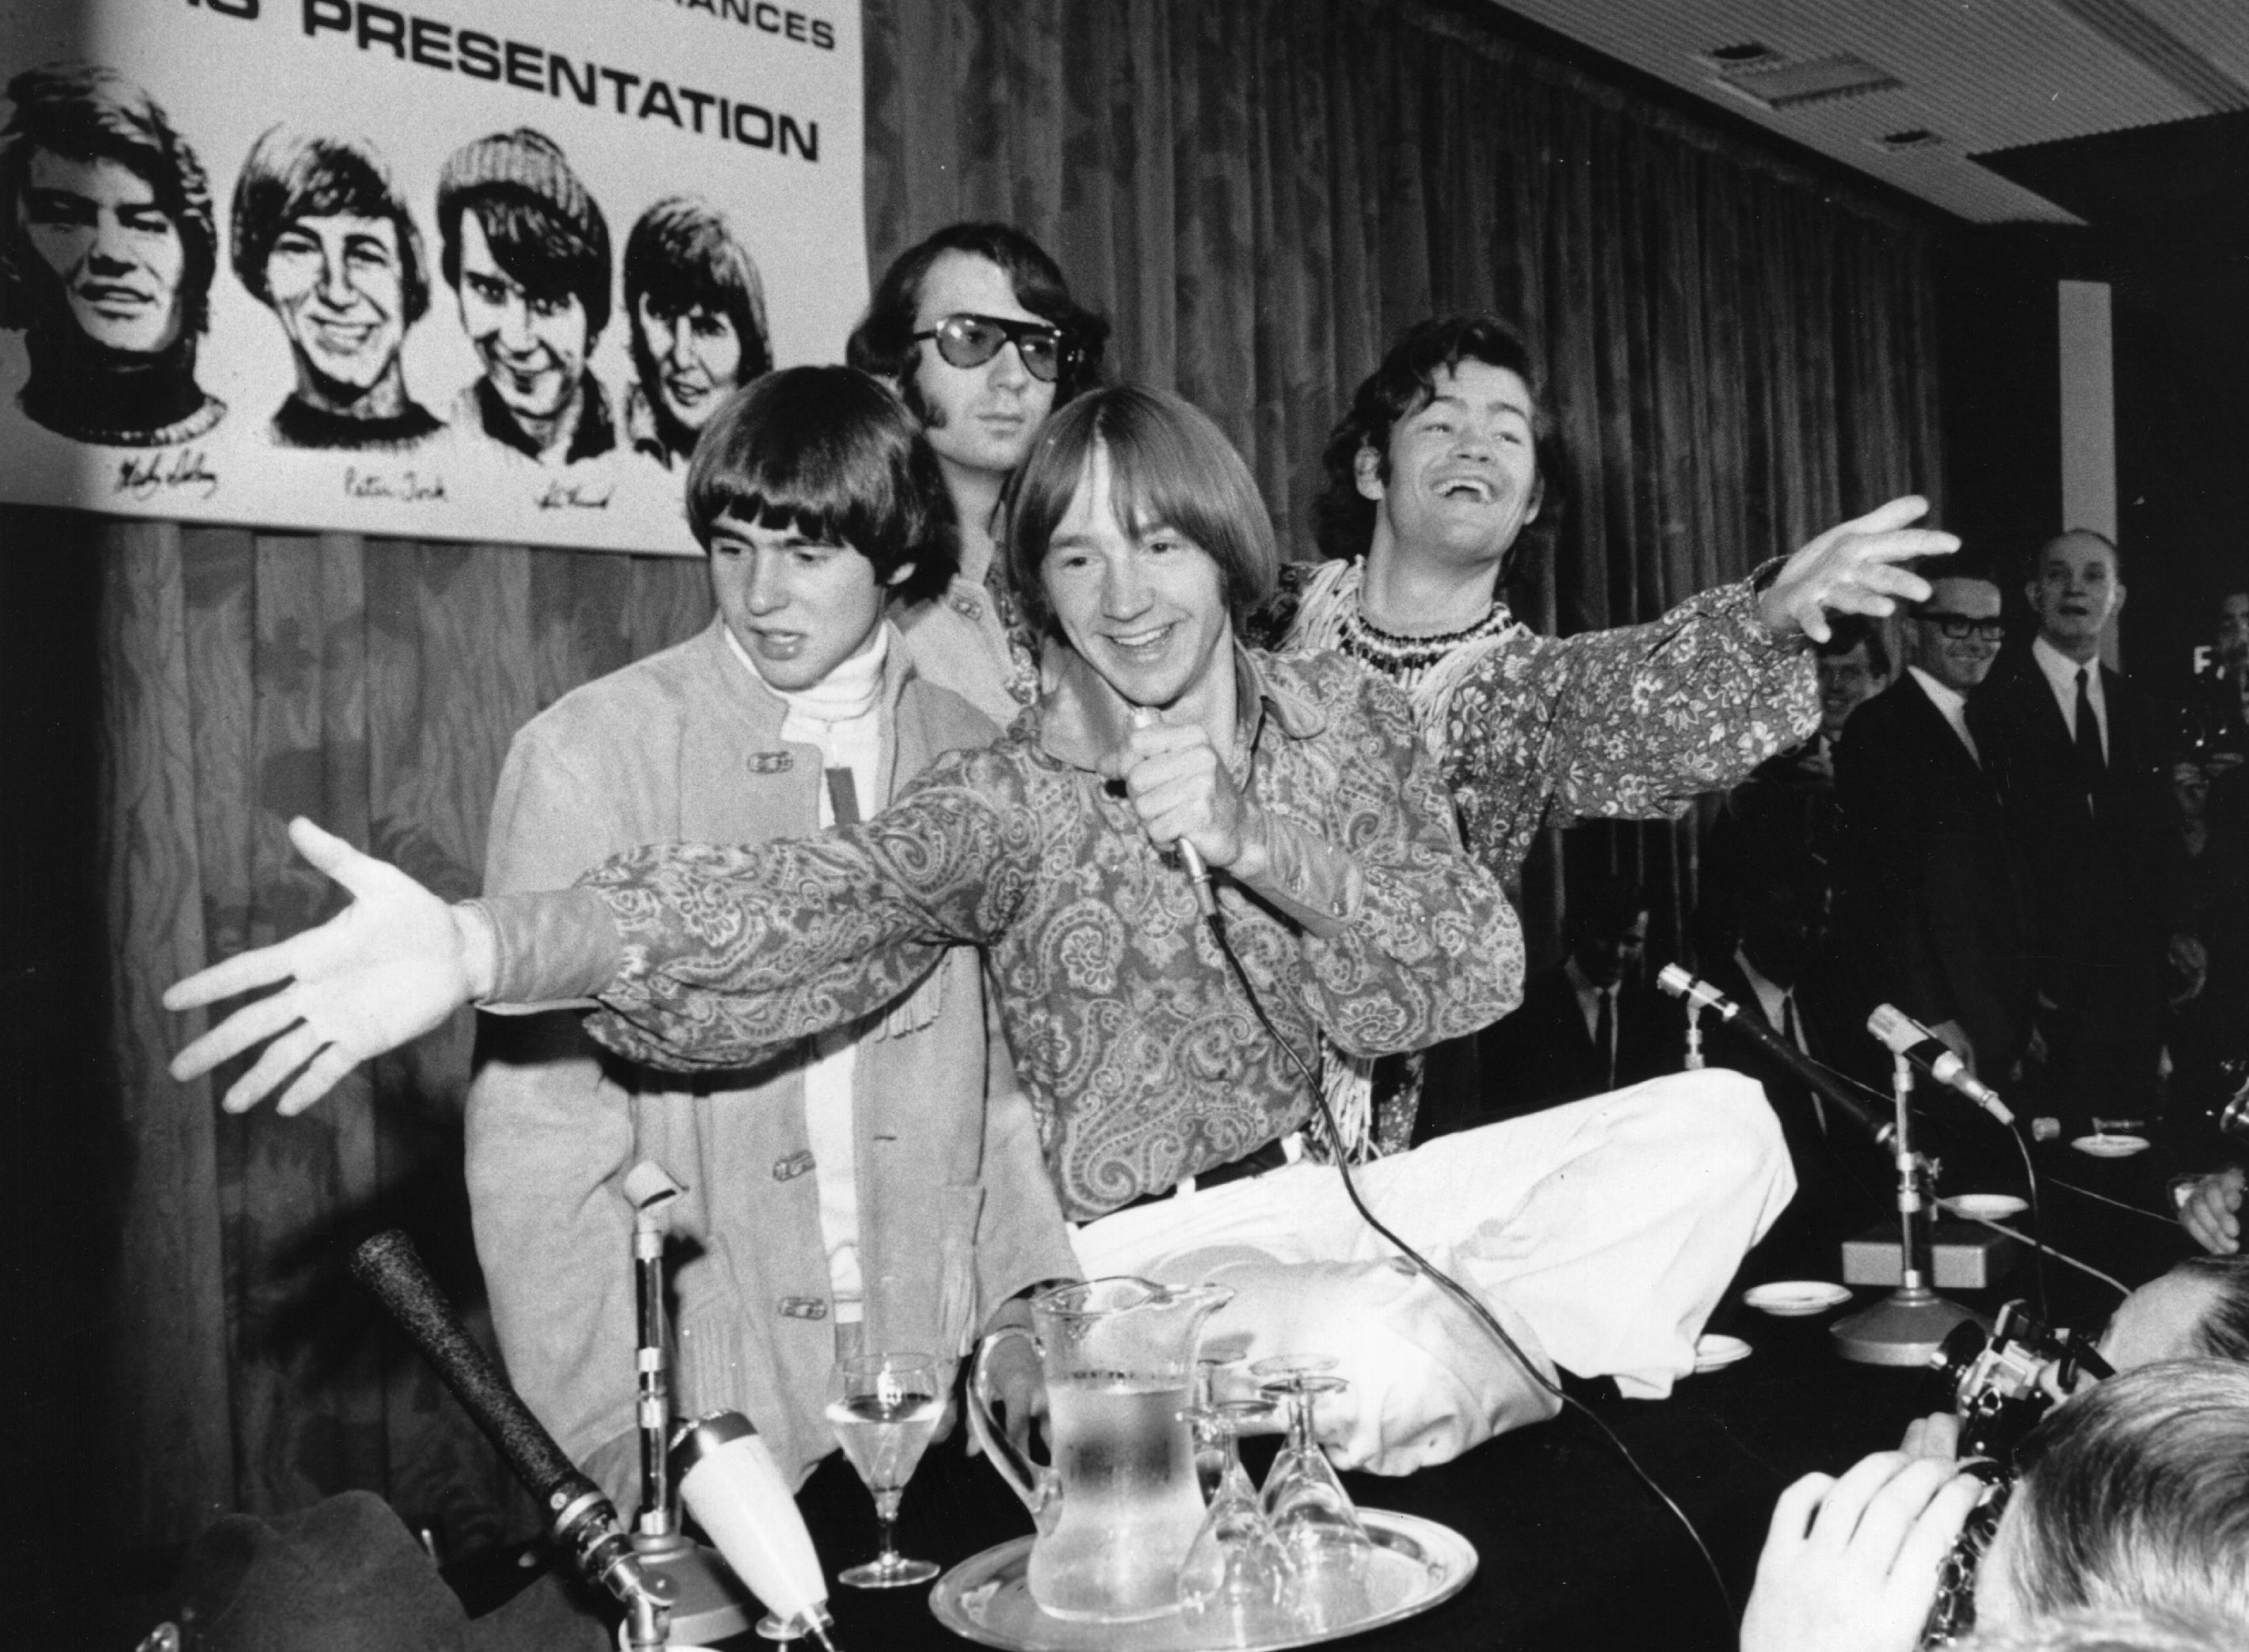 The Monkees at a table